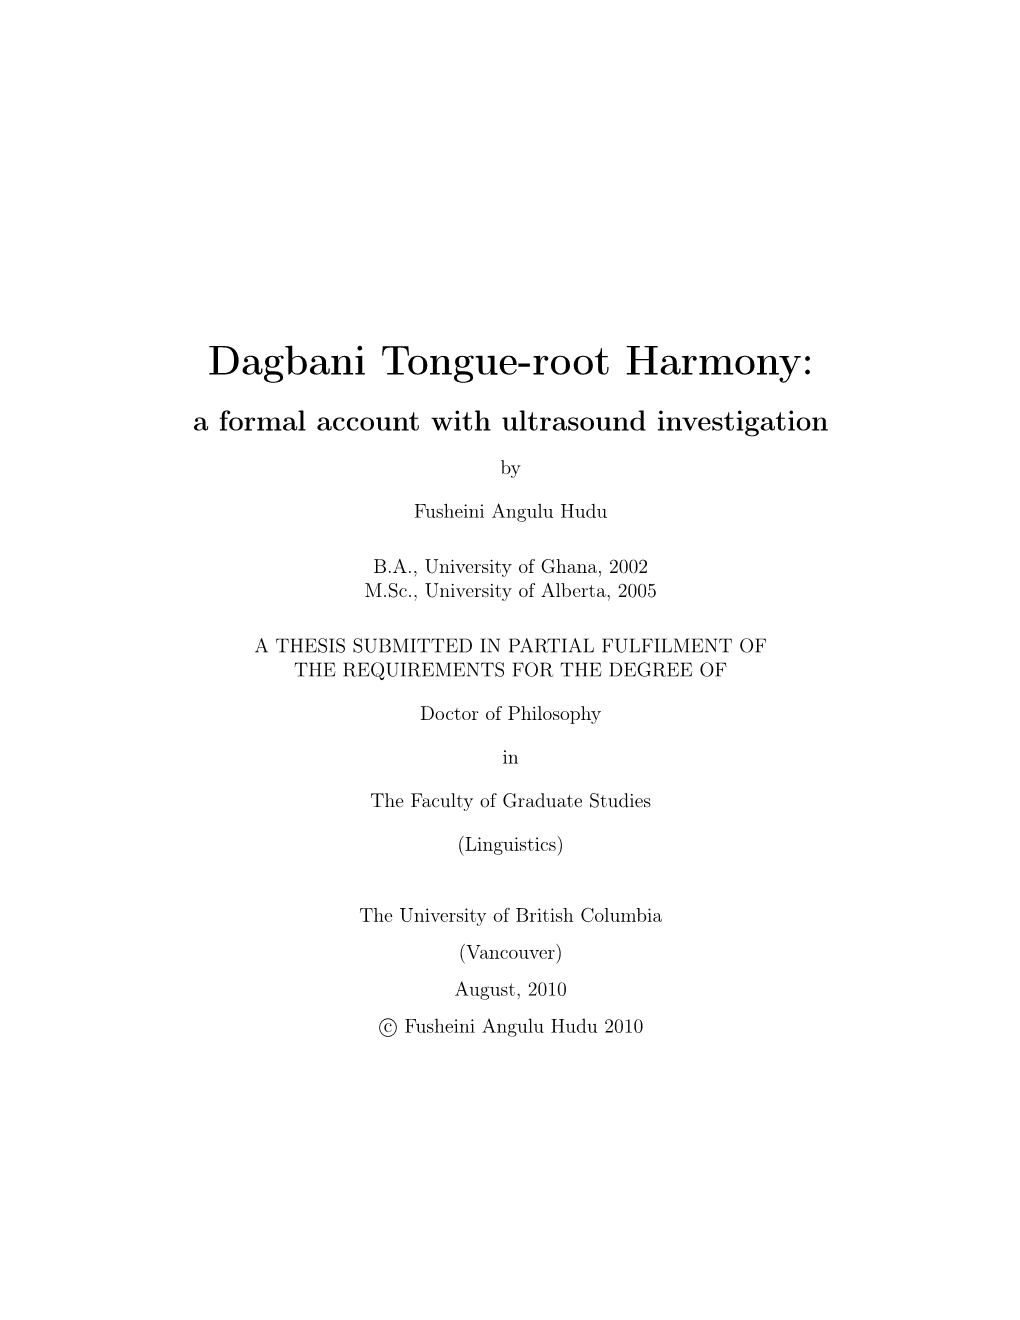 Dagbani Tongue-Root Harmony: a Formal Account with Ultrasound Investigation